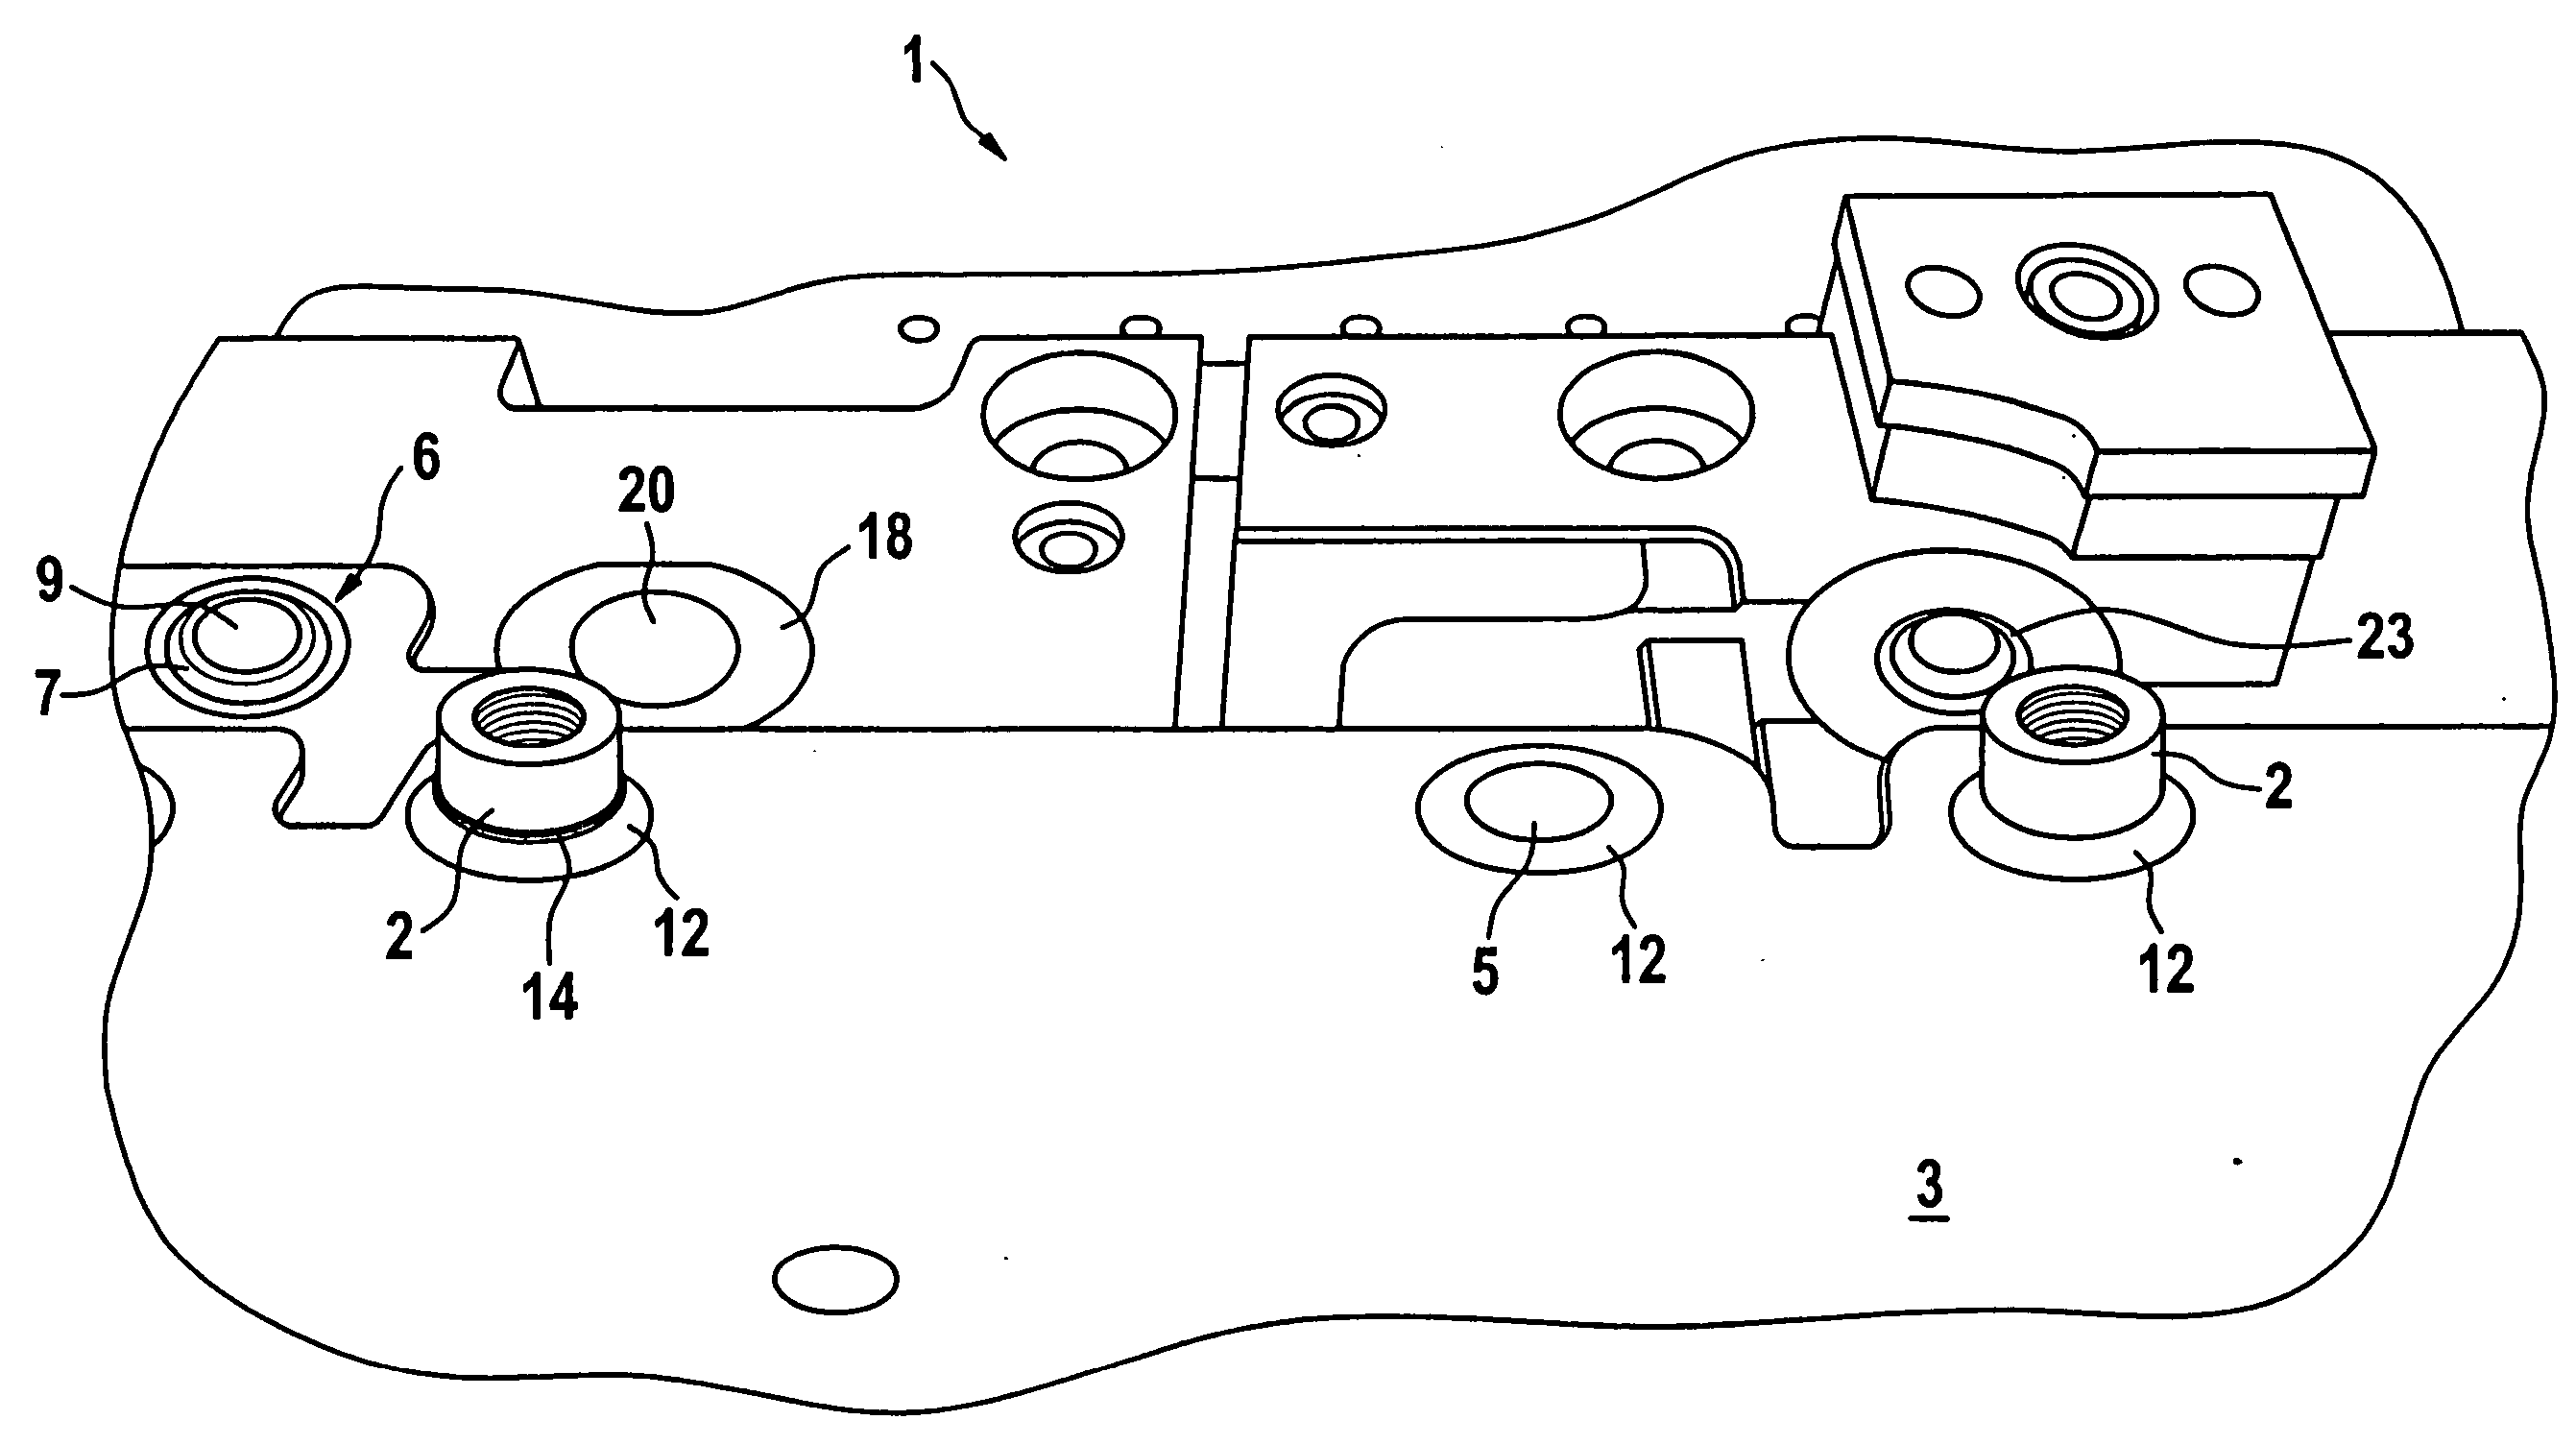 Method and Device for Fastening a Rivet Nut on a Workpiece